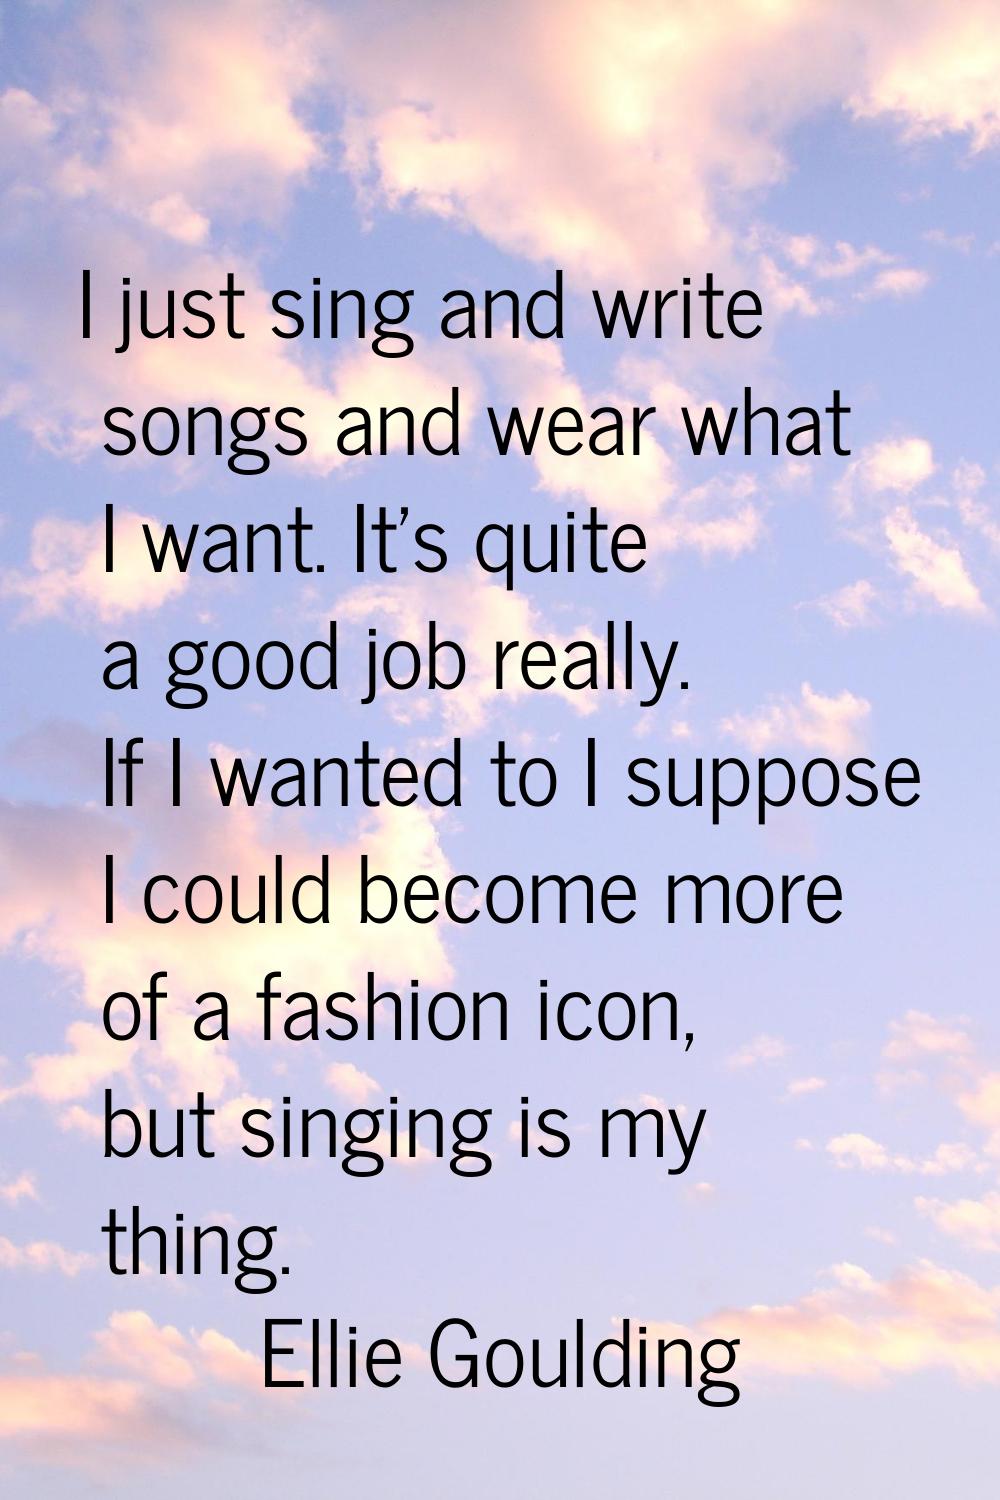 I just sing and write songs and wear what I want. It's quite a good job really. If I wanted to I su